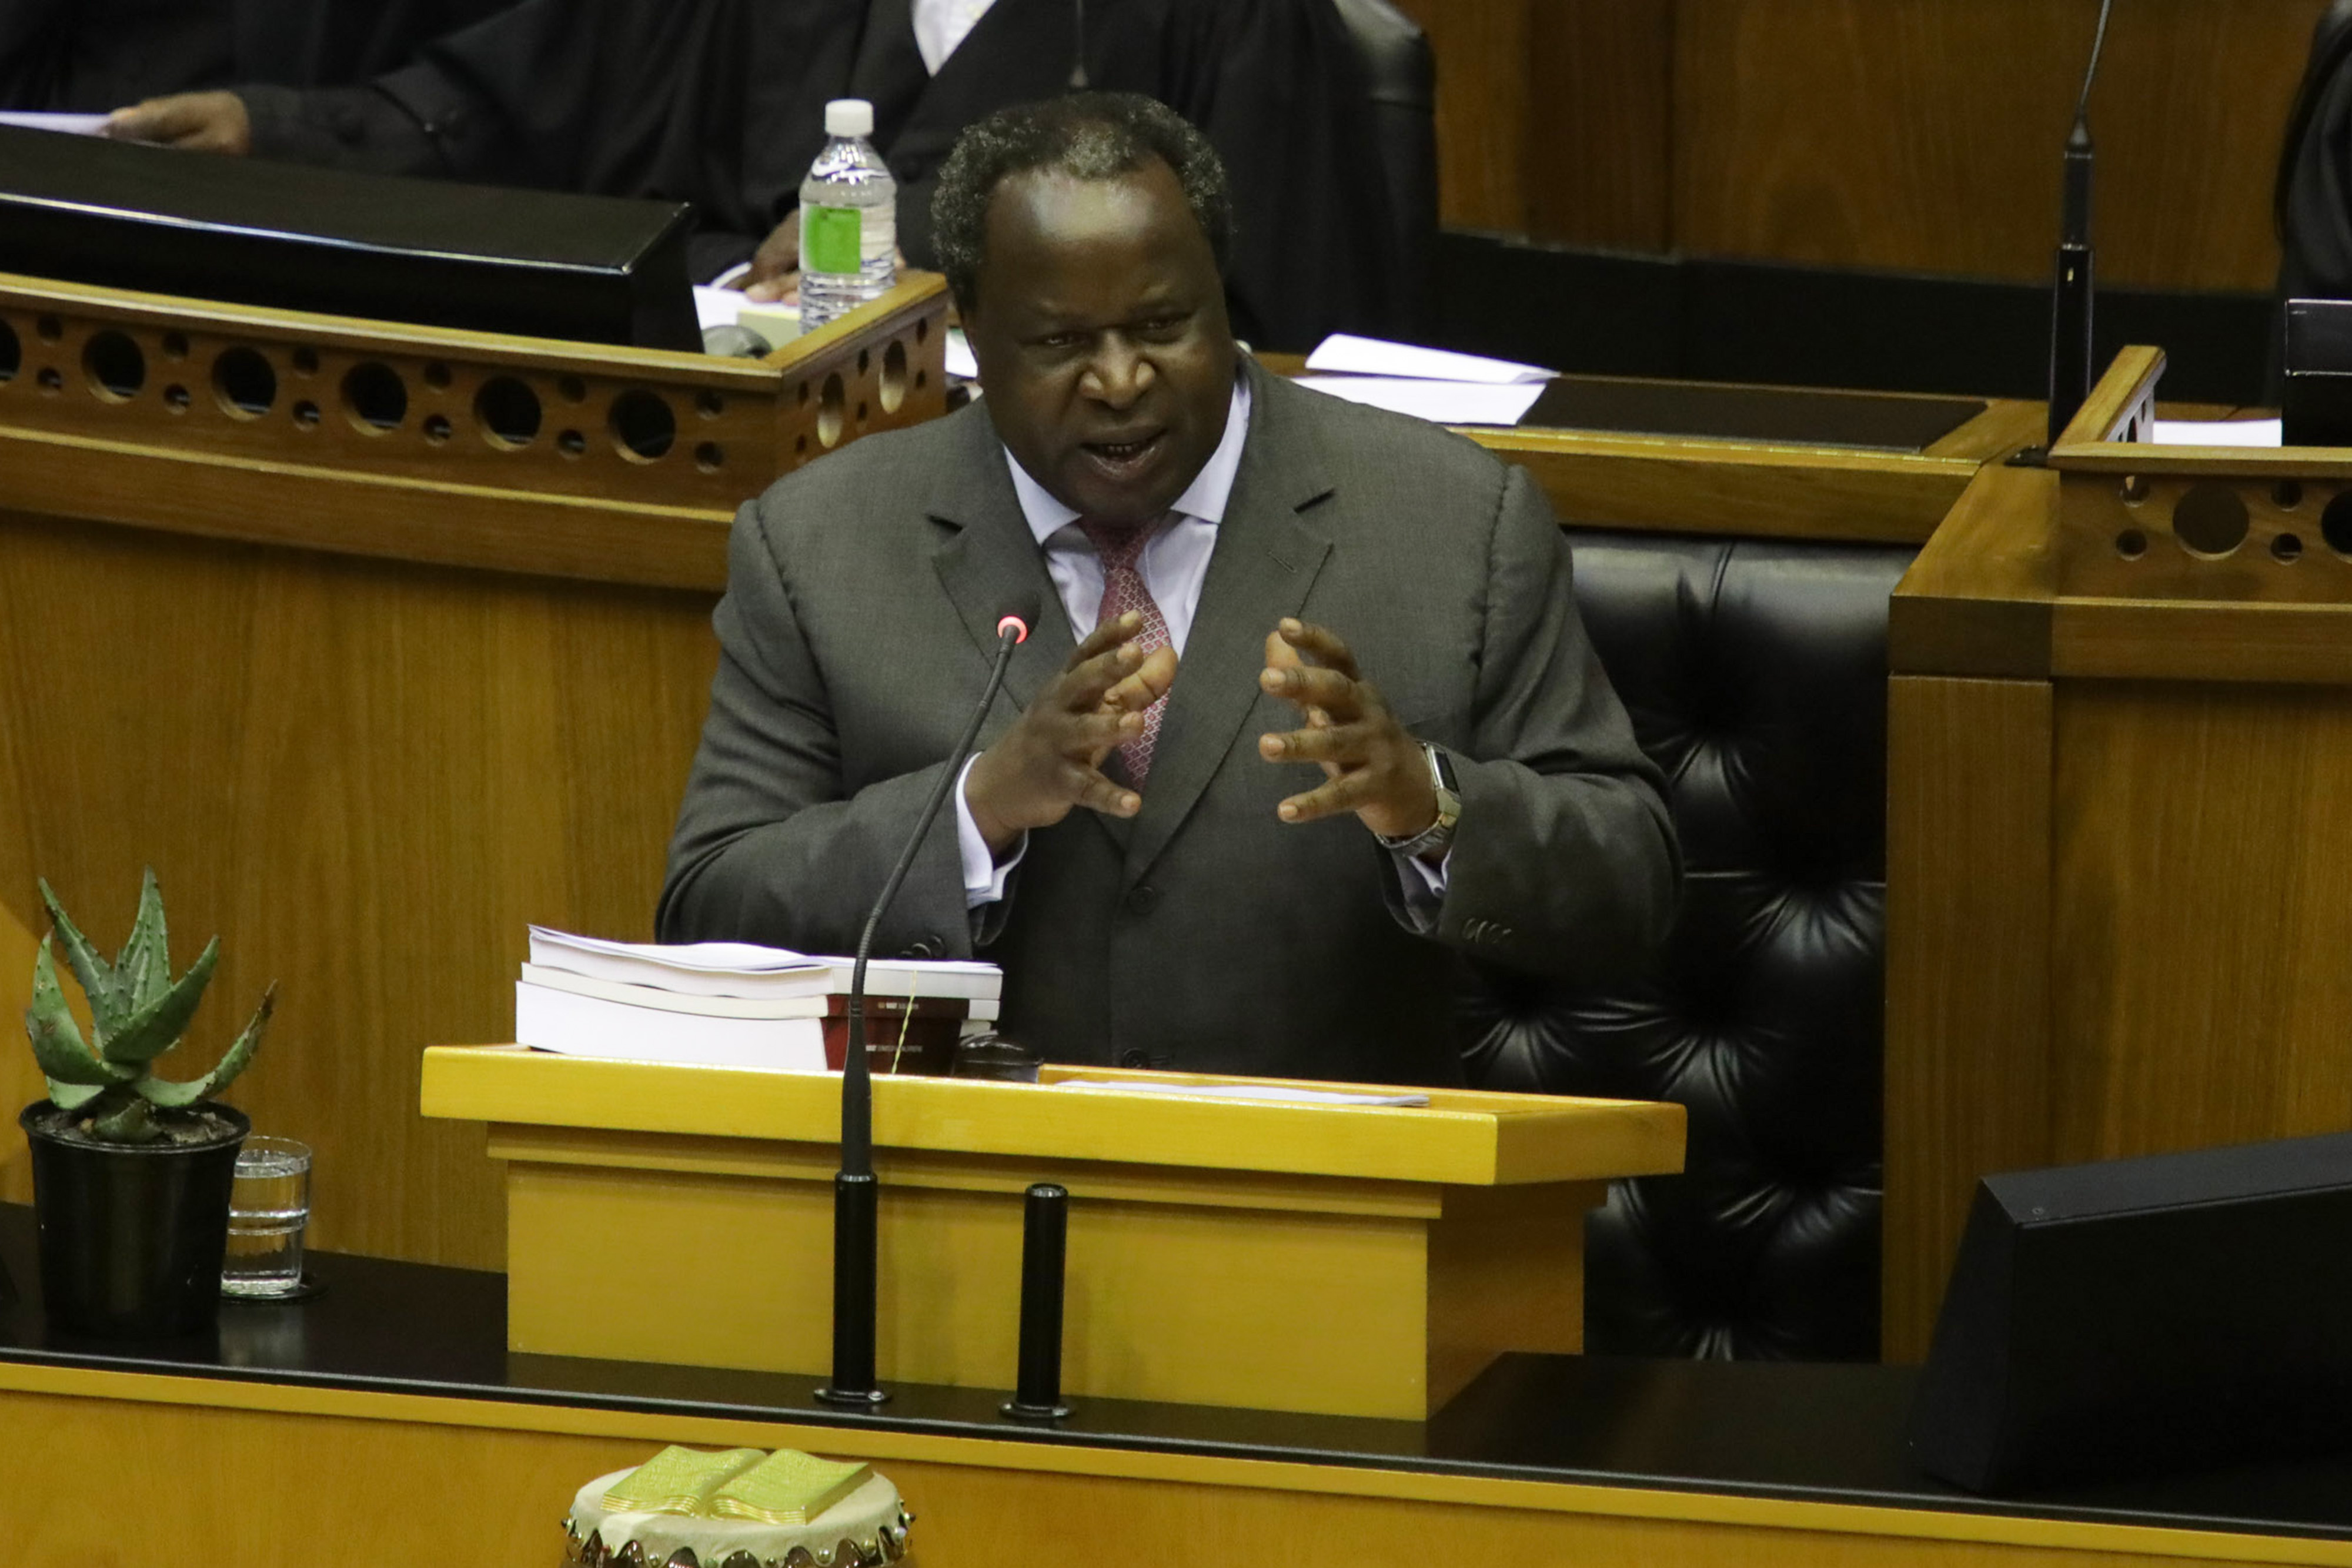 While the cabinet backs Mboweni’s plans to target a primary budget surplus by 2023-24, any austerity measures are likely to face opposition, including from politically influential labor groups.